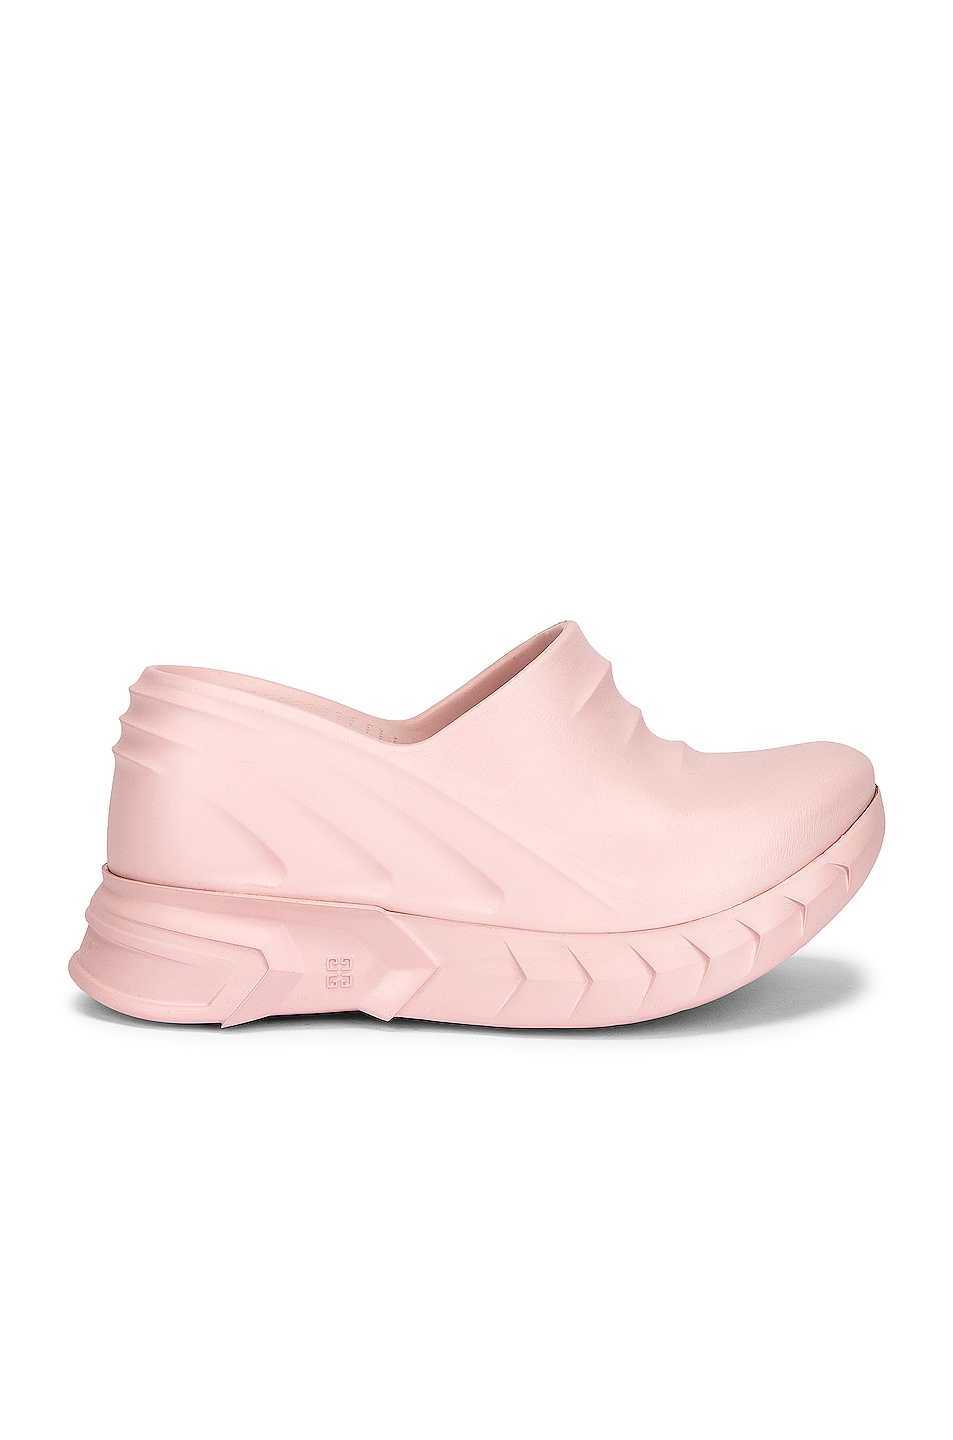 Image 1 of Givenchy Marshmallow Wedge Clogs in Blush Pink